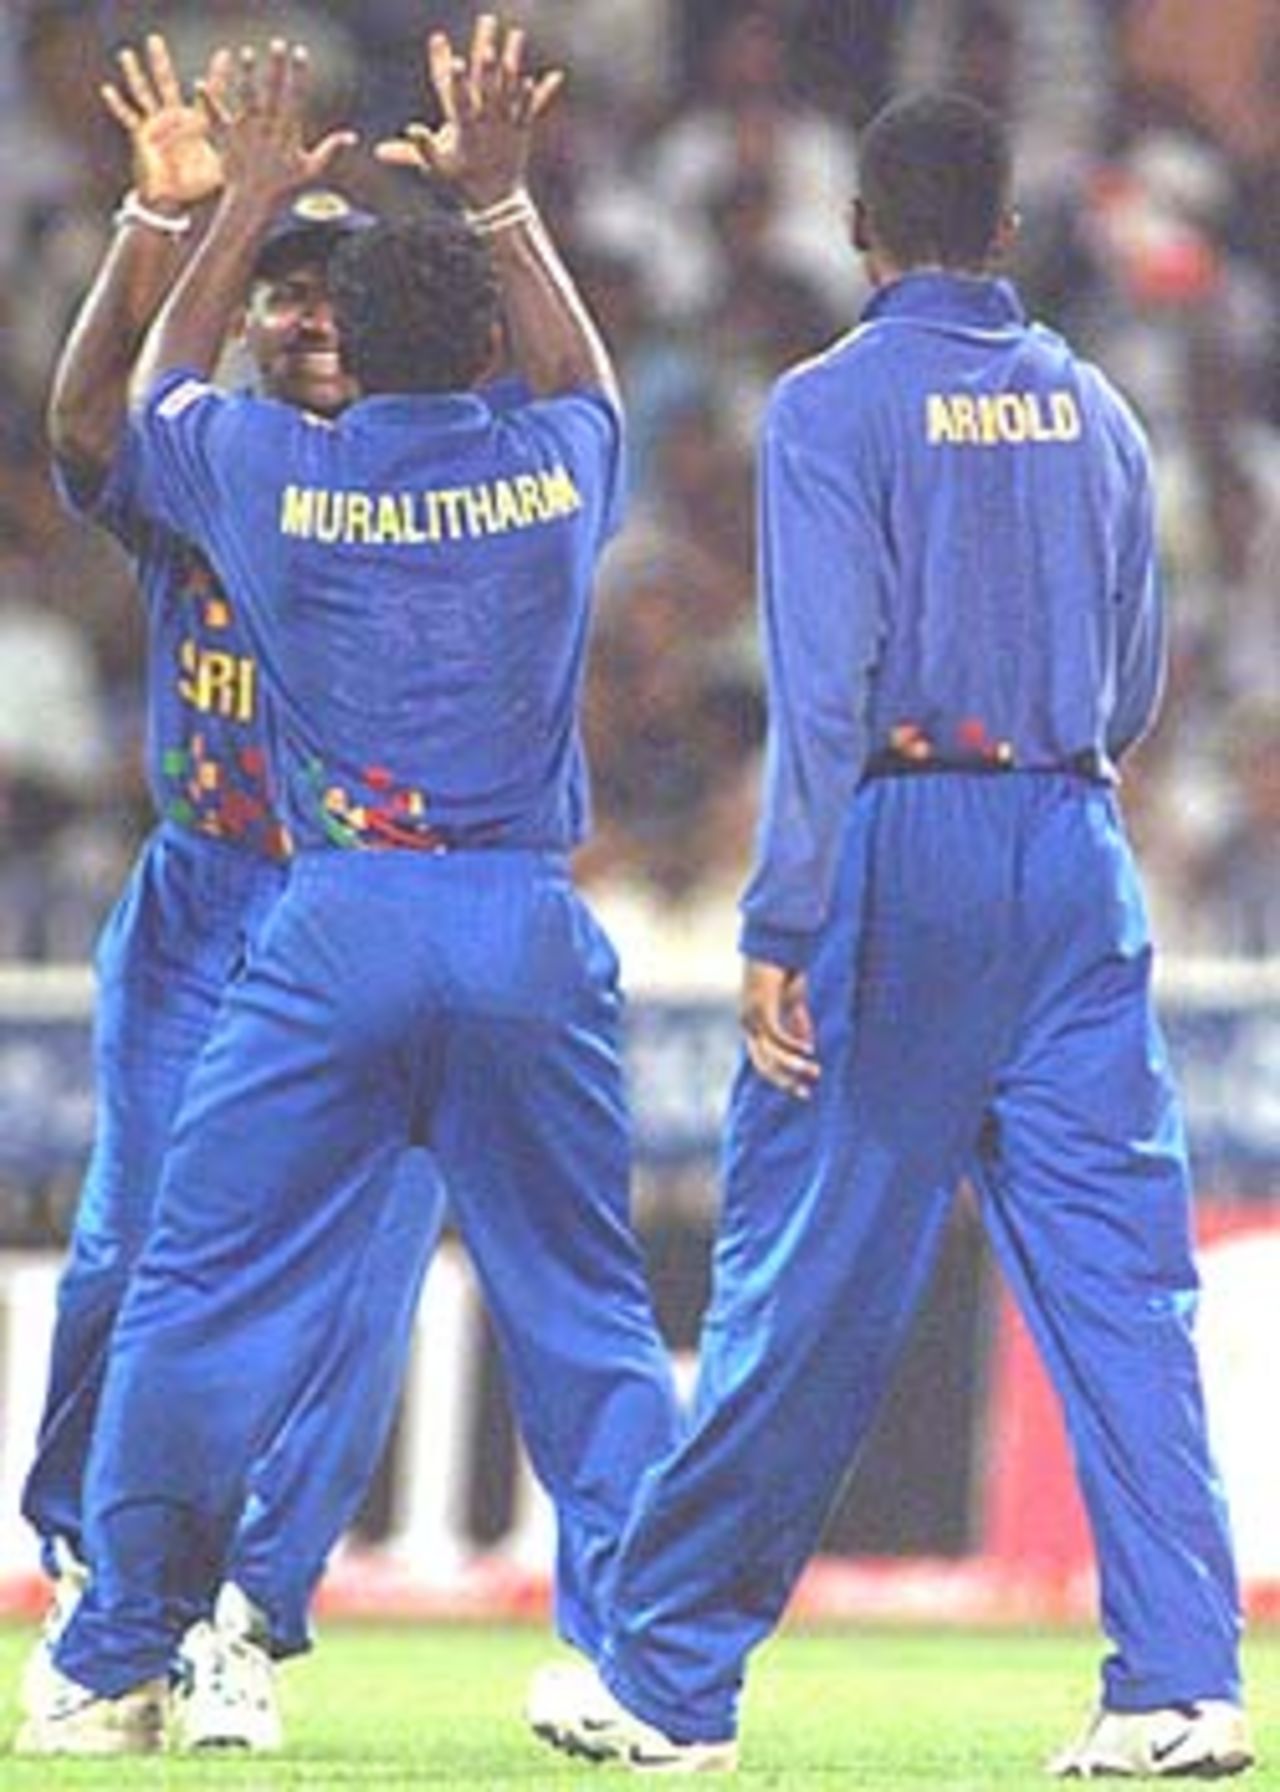 Murali celebrates after striking yet another lethal blow in his record breaking spell, Coca-Cola Champions Trophy, 2000/01, 6th Match, India v Sri Lanka, Sharjah C.A. Stadium, 27 October 2000.